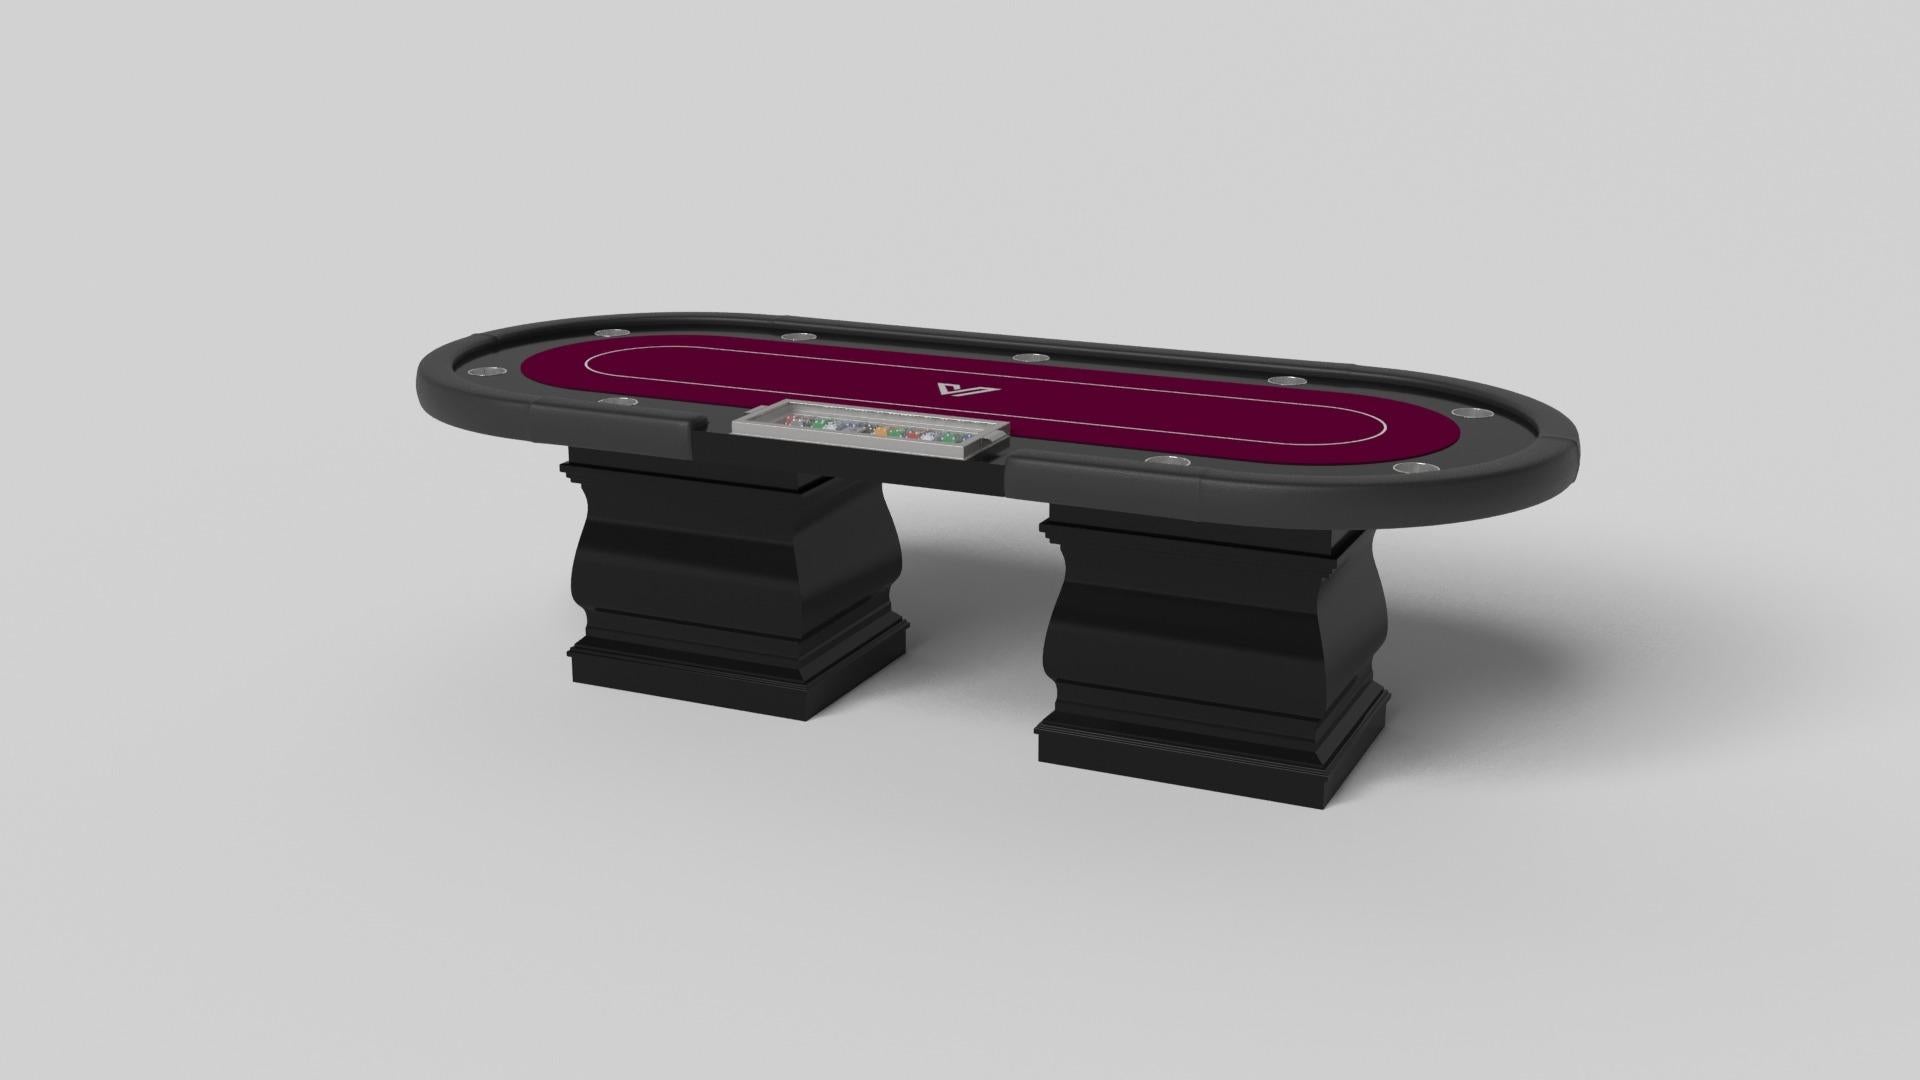 Two hand-sculpted legs bestow a sense of classic style upon this handcrafted poker table in white. This luxury wood game table features a smooth rectangular top perched upon two wide baluster column legs that mimic the curves and lines of crown